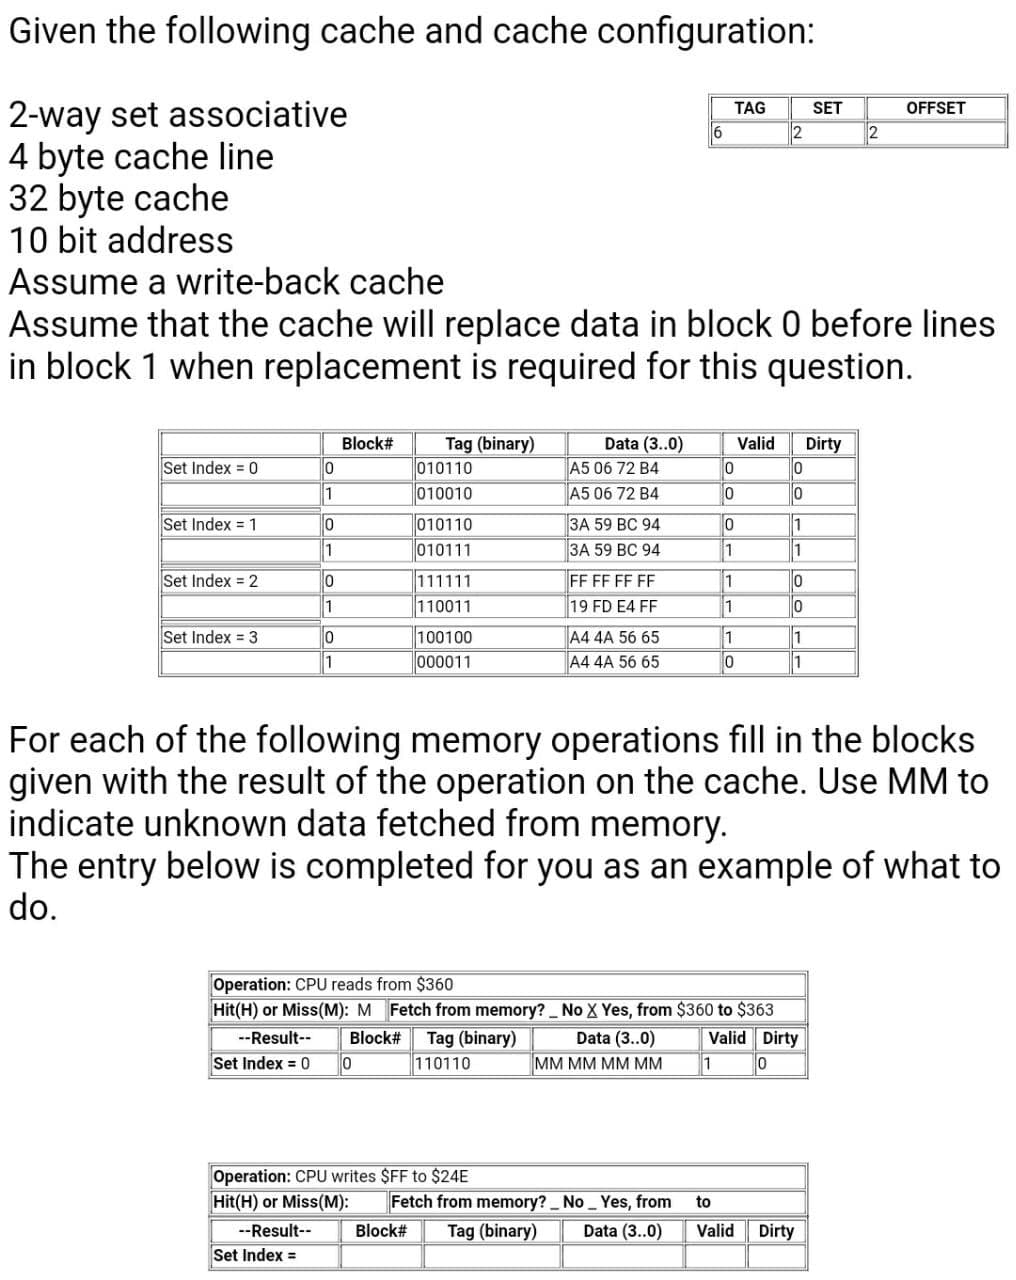 Given the following cache and cache configuration:
2-way set associative
4 byte cache line
32 byte cache
10 bit address
Assume a write-back cache
TAG
SET
OFFSET
2
Assume that the cache will replace data in block 0 before lines
in block 1 when replacement is required for this question.
Data (3..0)
A5 06 72 B4
A5 06 72 B4
Block#
Tag (binary)
010110
Valid
Dirty
Set Index = 0
1
010010
Set Index = 1
010110
010111
3A 59 BC 94
1
1
3A 59 BC 94
1
1
111111
110011
Set Index = 2
FF FF FF FF
19 FD E4 FF
1
1
1
1
1
Set Index = 3
1
100100
000011
A4 4A 56 65
1
A4 4A 56 65
For each of the following memory operations fill in the blocks
given with the result of the operation on the cache. Use MM to
indicate unknown data fetched from memory.
The entry below is completed for you as an example of what to
do.
Operation: CPU reads from $360
Hit(H) or Miss(M): M Fetch from memory? No X Yes, from $360 to $363
Valid Dirty
Tag (binary)
110110
--Result--
Block#
Data (3..0)
Set Index = 0
MM MM MM MM
1
Operation: CPU writes $FF to $24E
Hit(H) or Miss(M):
Fetch from memory? No _ Yes, from
to
--Result--
Block#
Tag (binary)
Data (3..0)
Valid
Dirty
Set Index =
